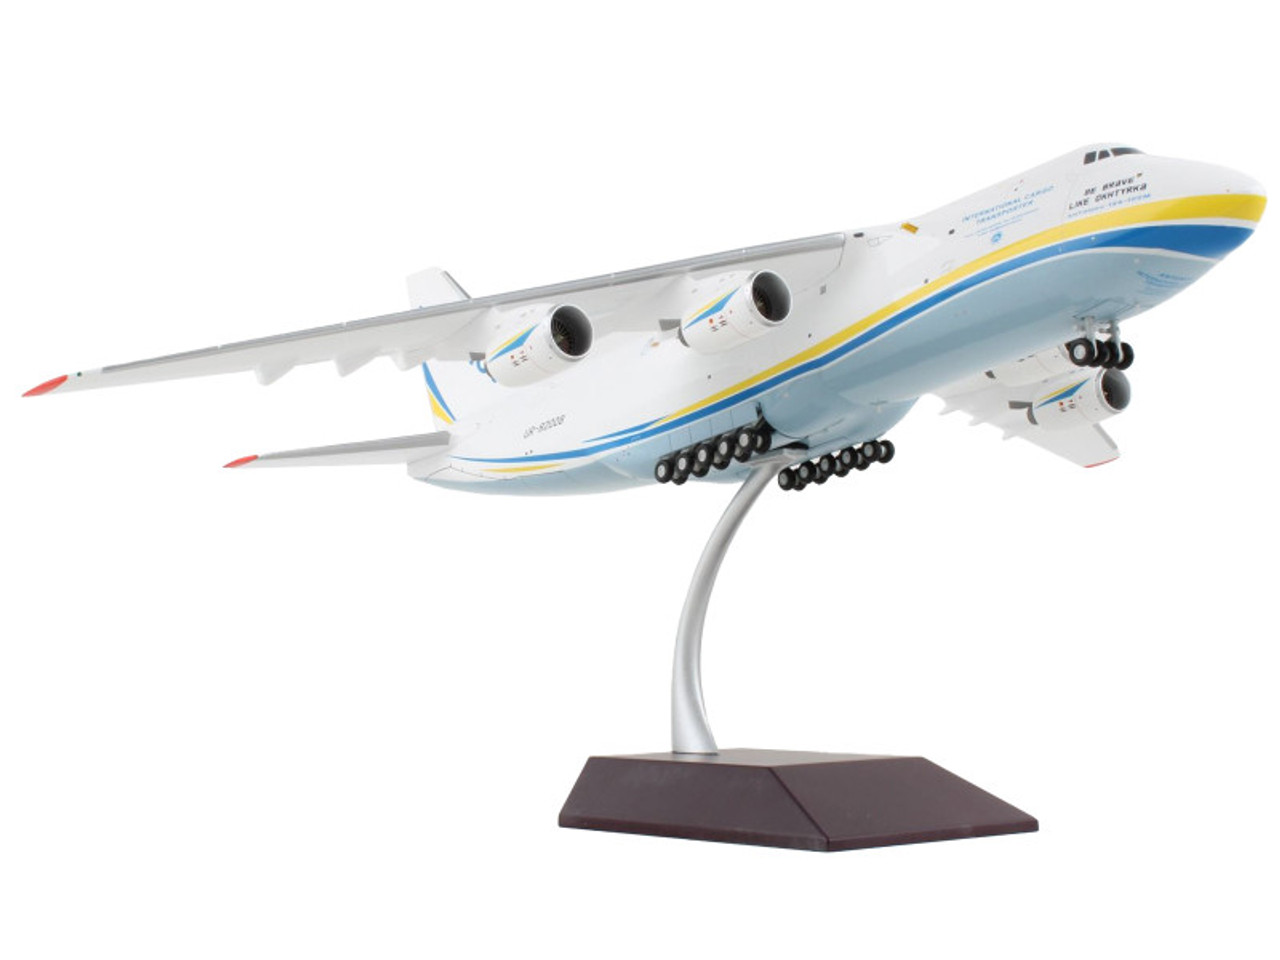 Antonov 124-100M Commercial Aircraft "Antonov Airlines" White with Blue and Yellow Stripes "Gemini 200" Series 1/200 Diecast Model Airplane by GeminiJets